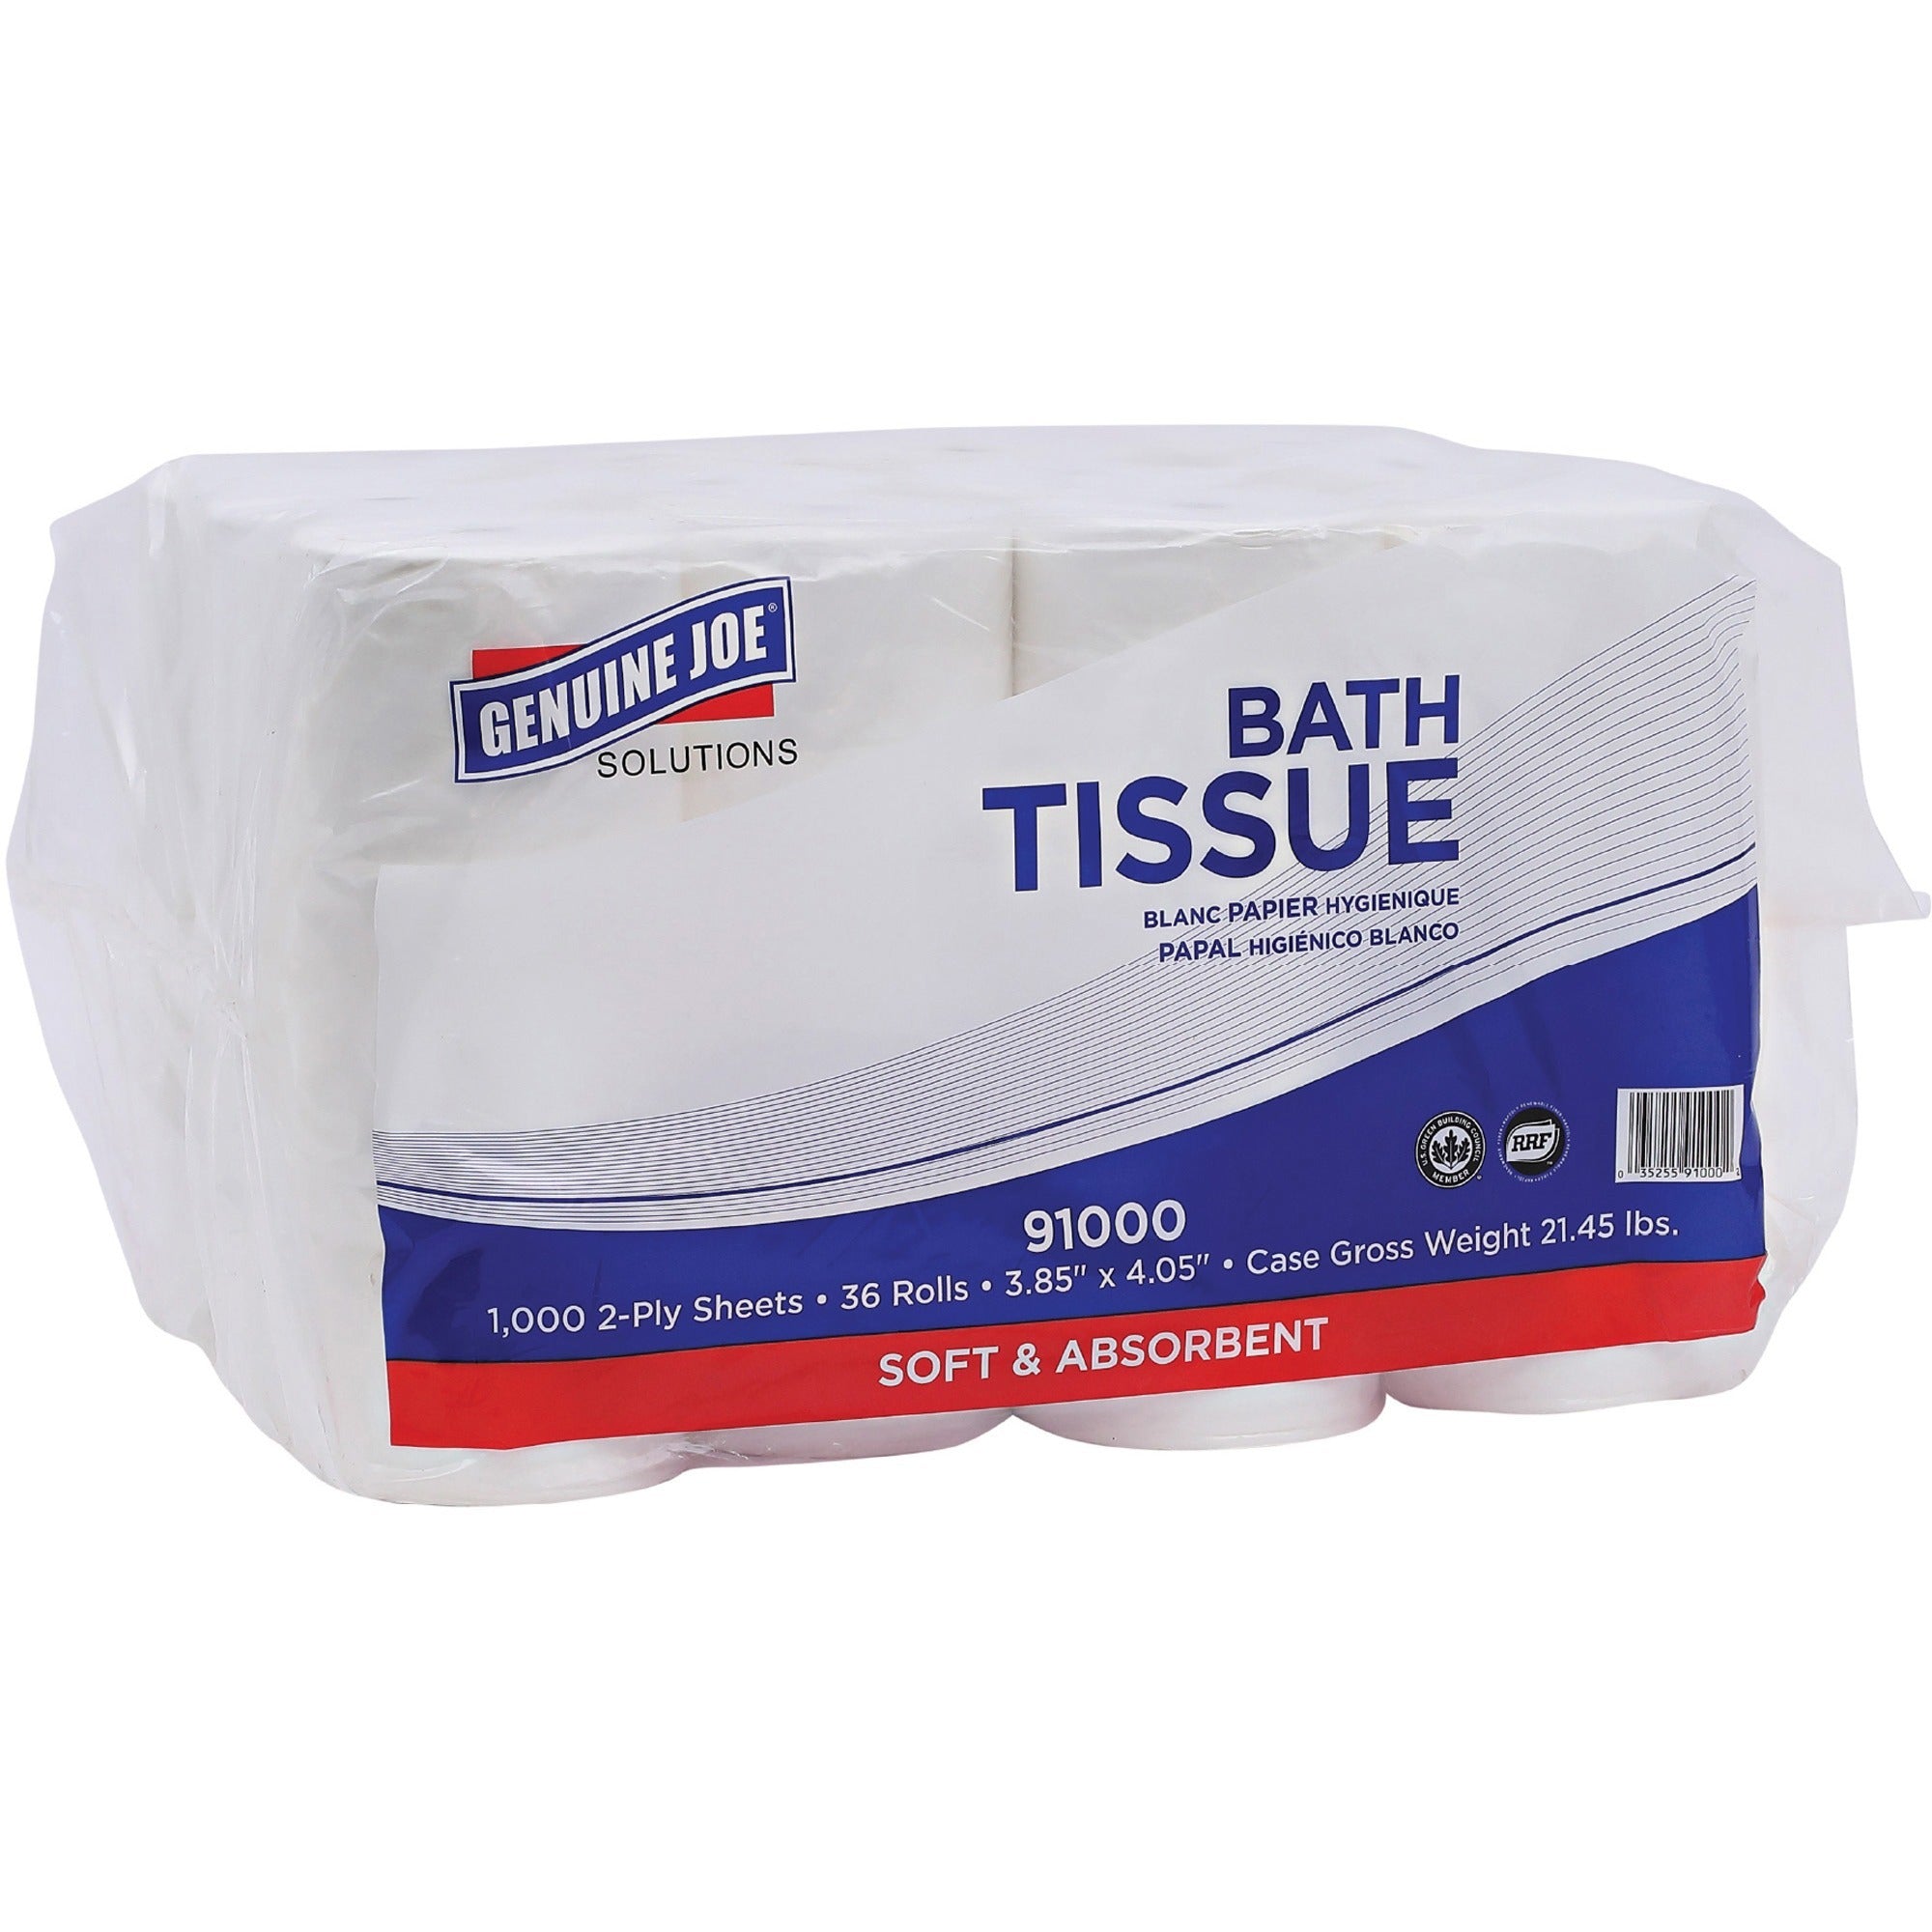 genuine-joe-solutions-double-capacity-bath-tissue-2-ply-1000-sheets-roll-white-embossed-for-bathroom-2016-pallet_gjo91000pl - 3